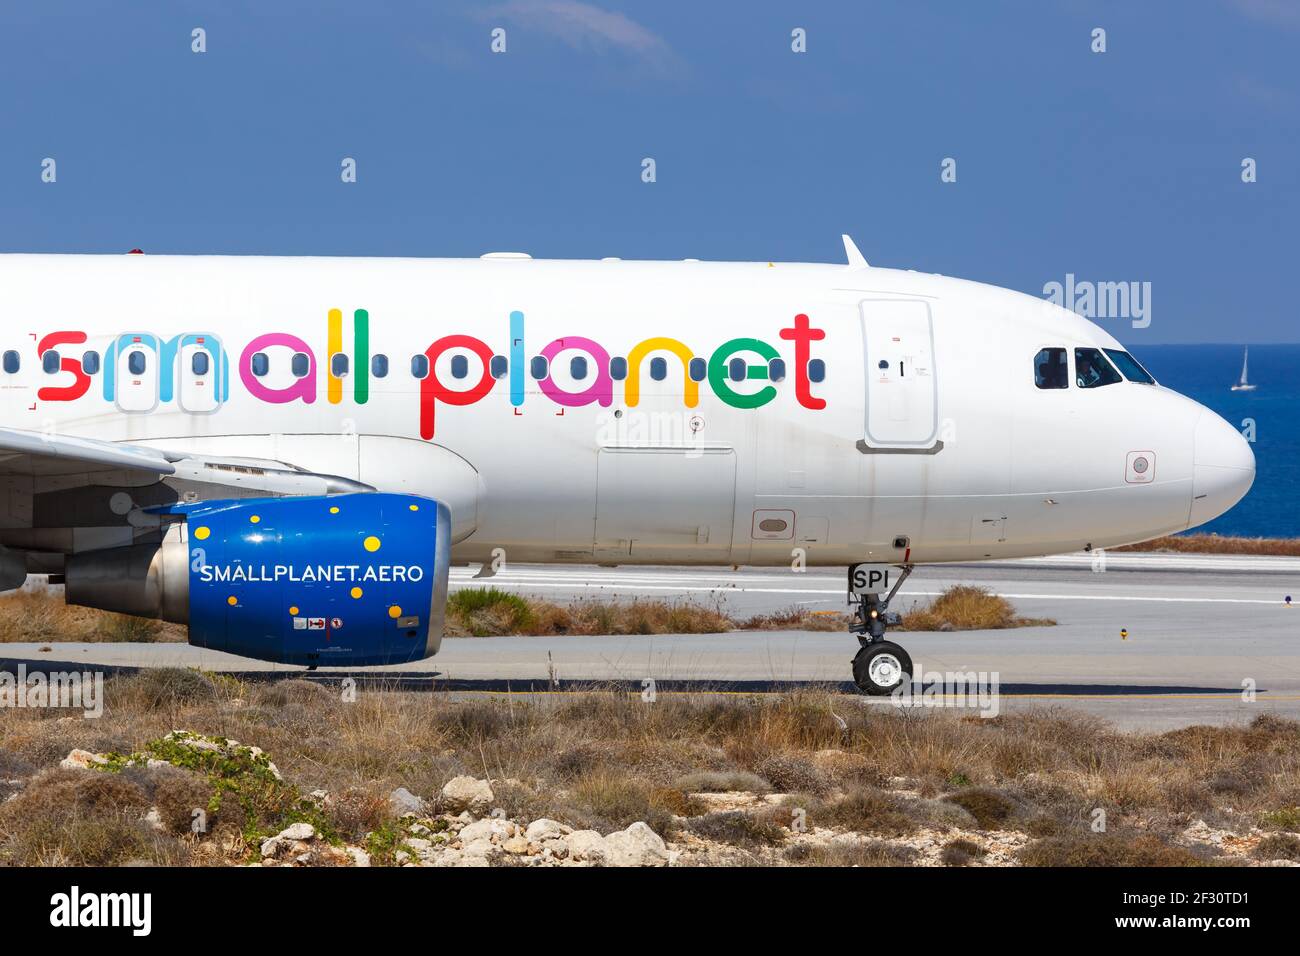 Heraklion, Greece - September 15, 2018: A Small Planet Airlines Germany Airbus A320 airplane at Heraklion airport (HER) in Greece. Stock Photo